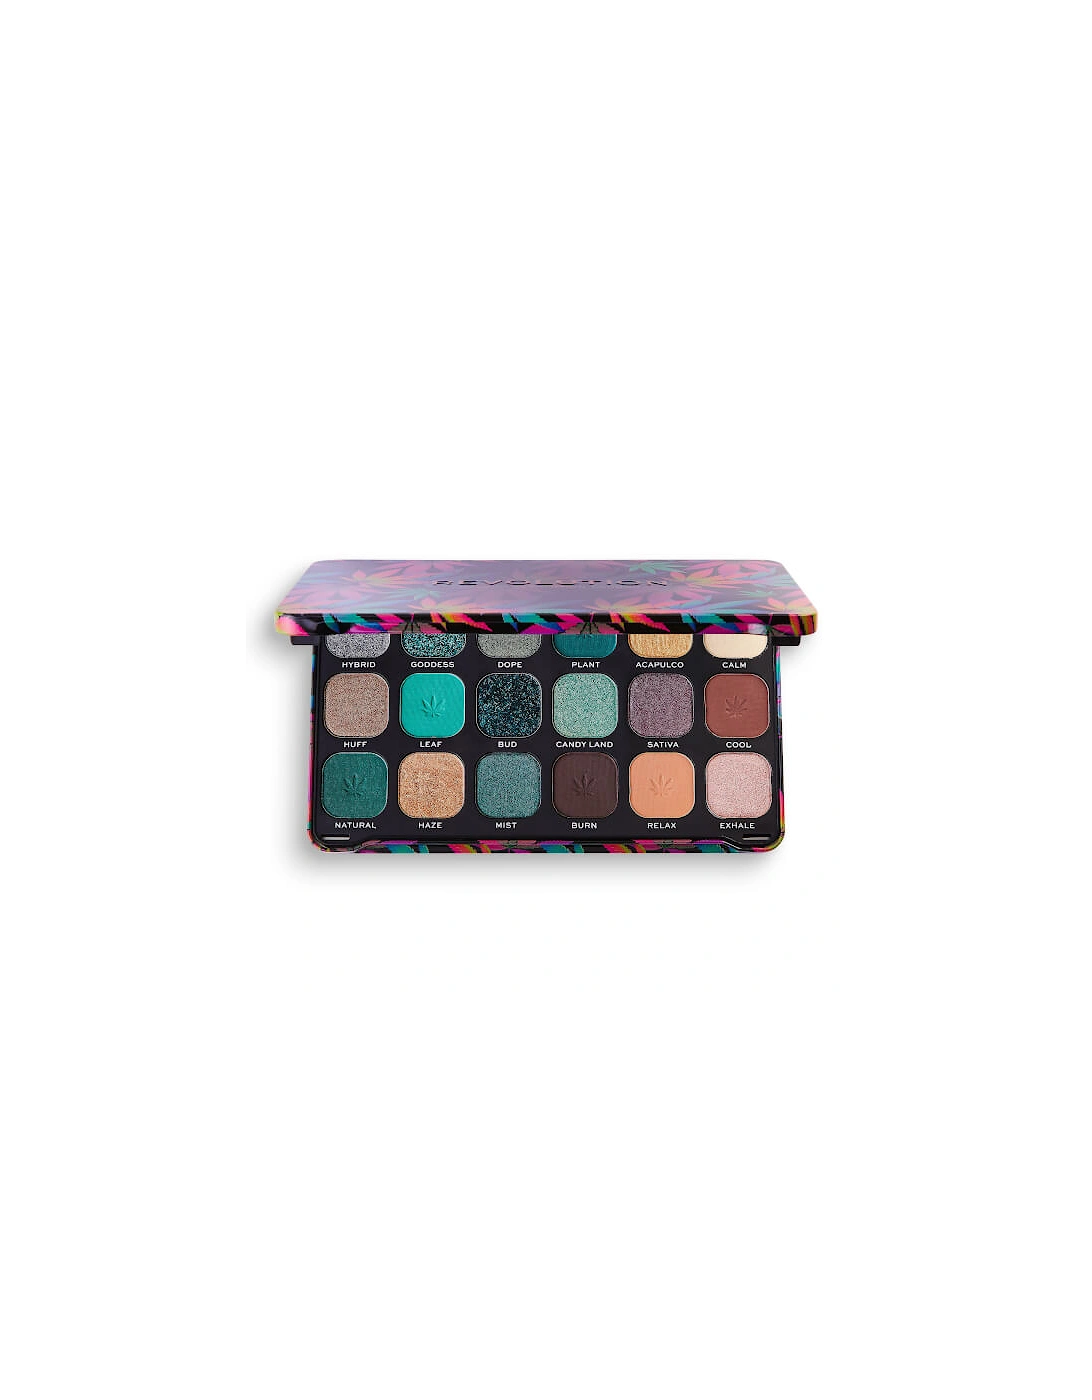 Makeup Forever Flawless Chilled with cannabis sativa Eyeshadow Palette, 2 of 1